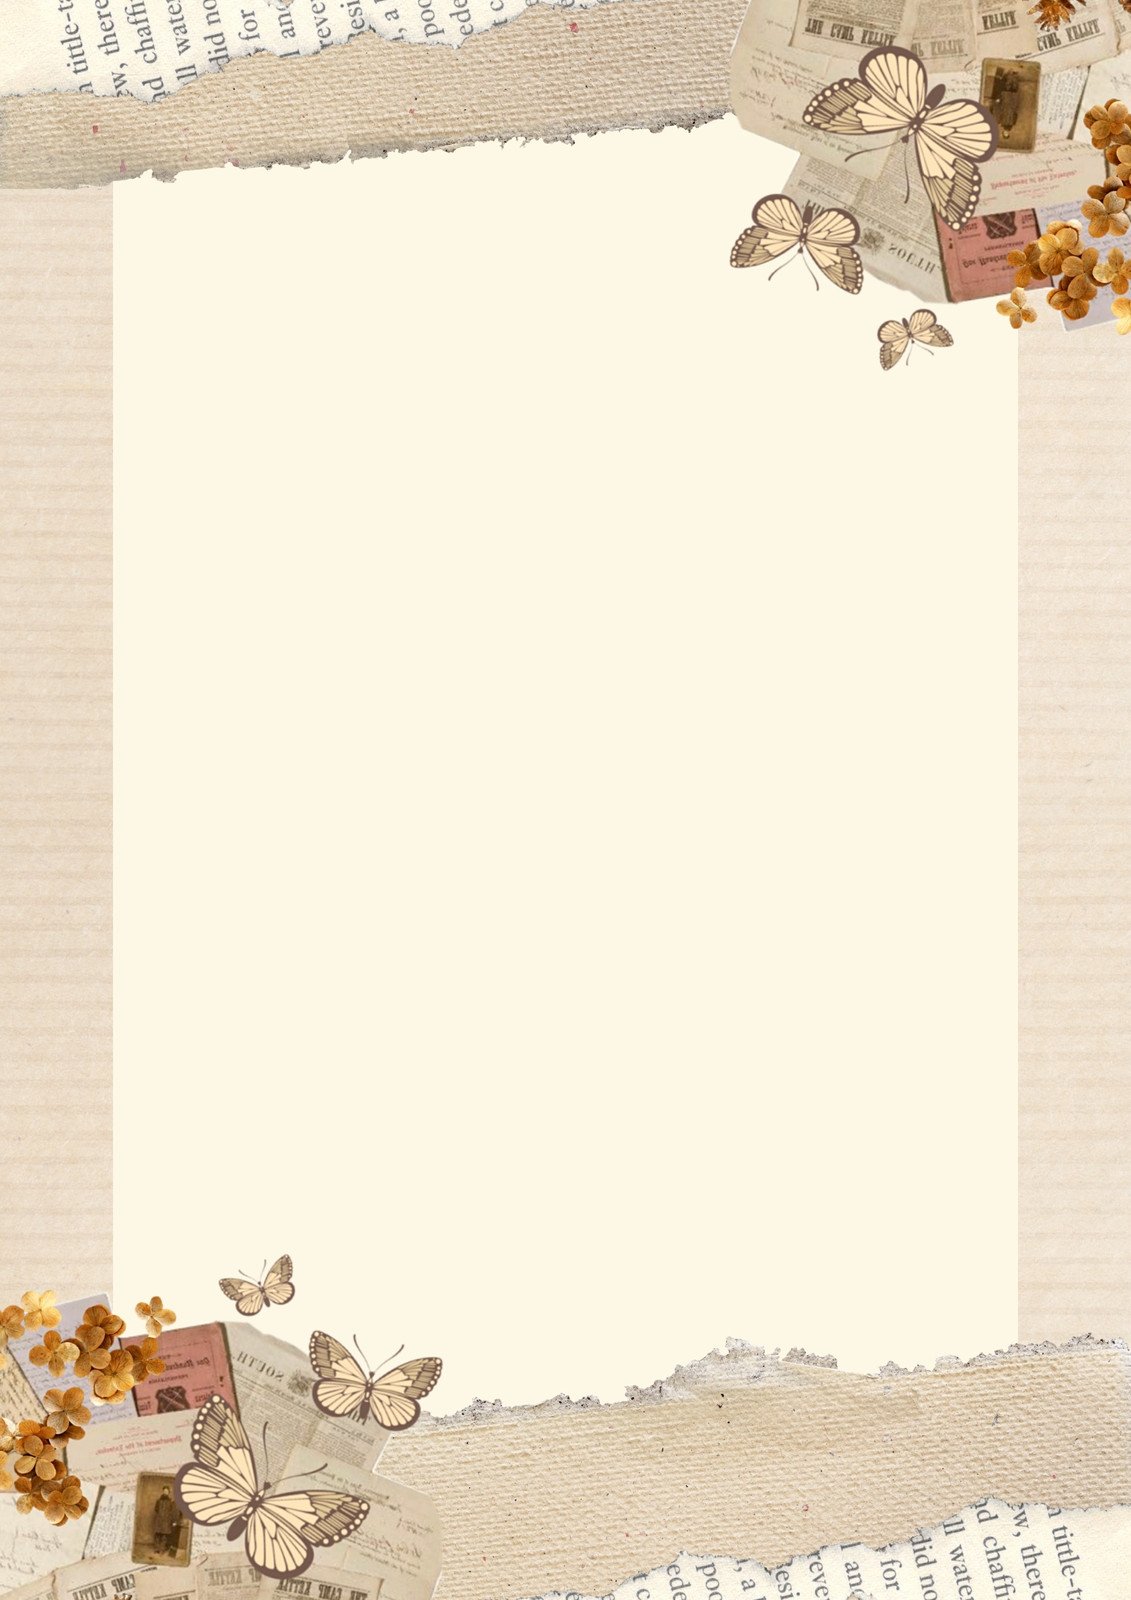 Free printable page border templates you can customize | Canva